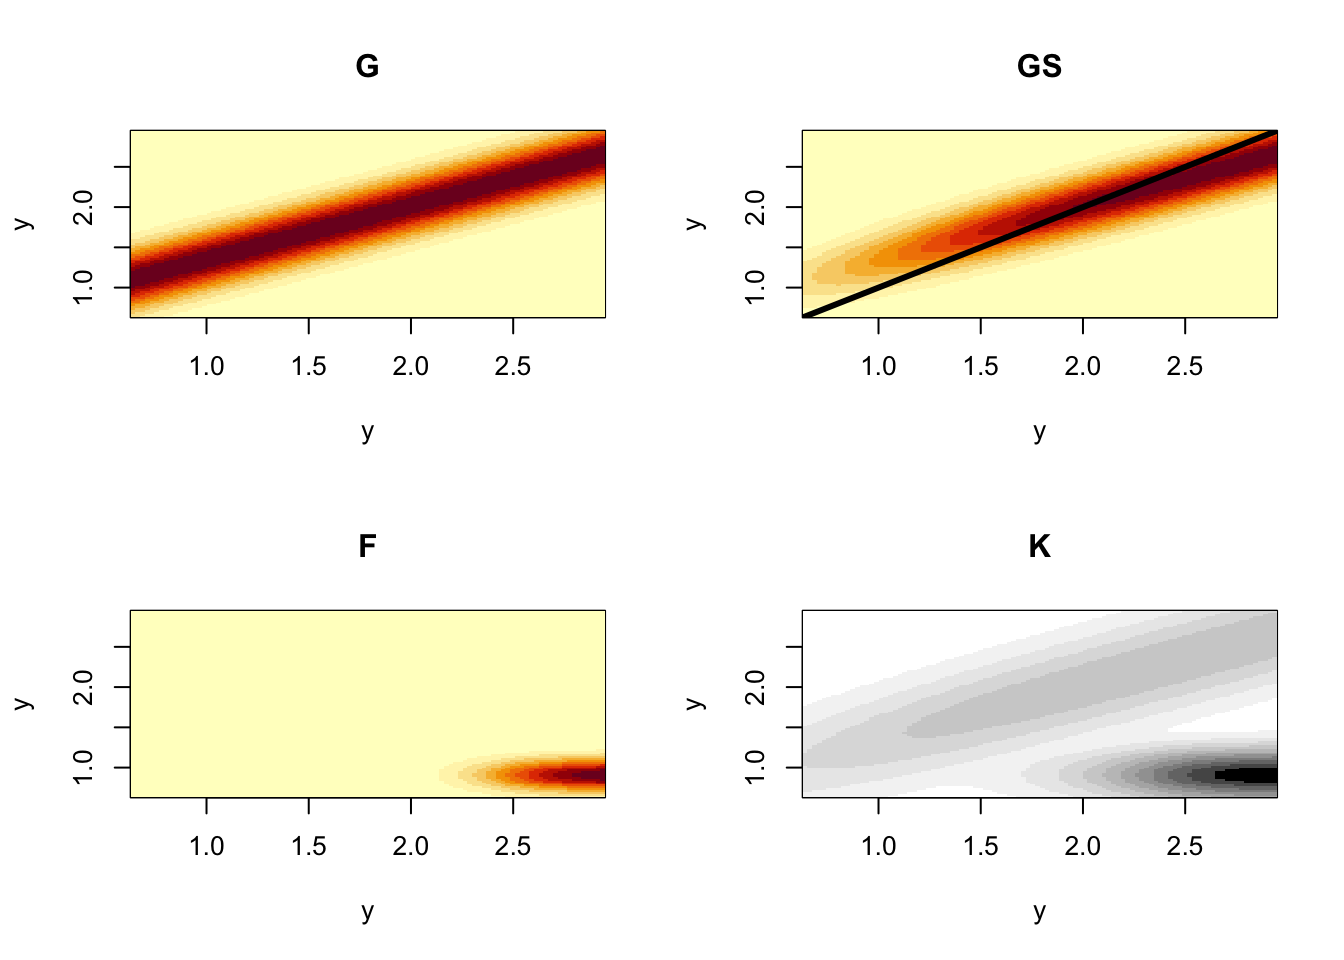 The component kernels G, S, and F, that make up the full demographic projection kernel, K, for smooth cone flower. By convention and unlike projection matrices, kernels scale both axes to start at the smallest size in the lower left corner. The color scaling of the full kernel differs slightly so that we can see the contributions of G, S, and F.